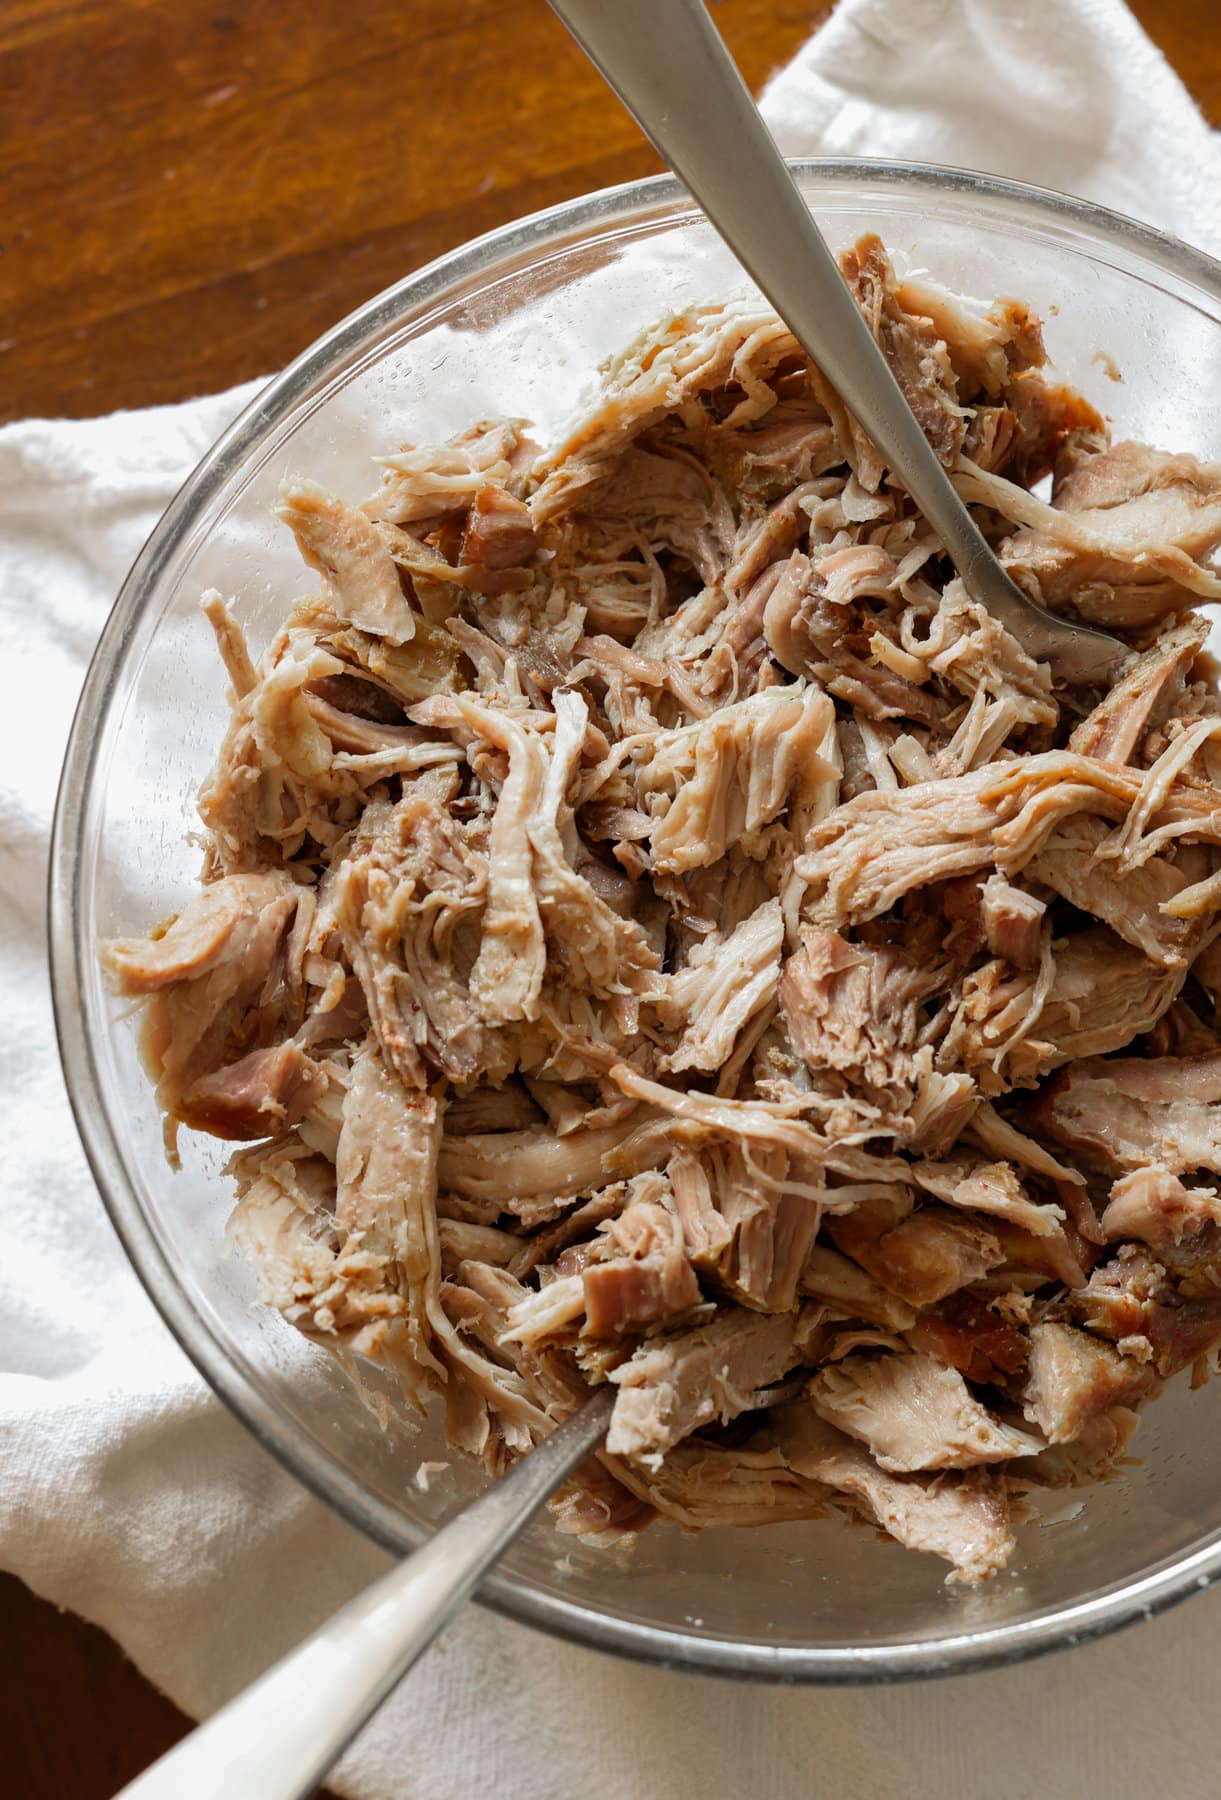 Pulled pork in a glass bowl